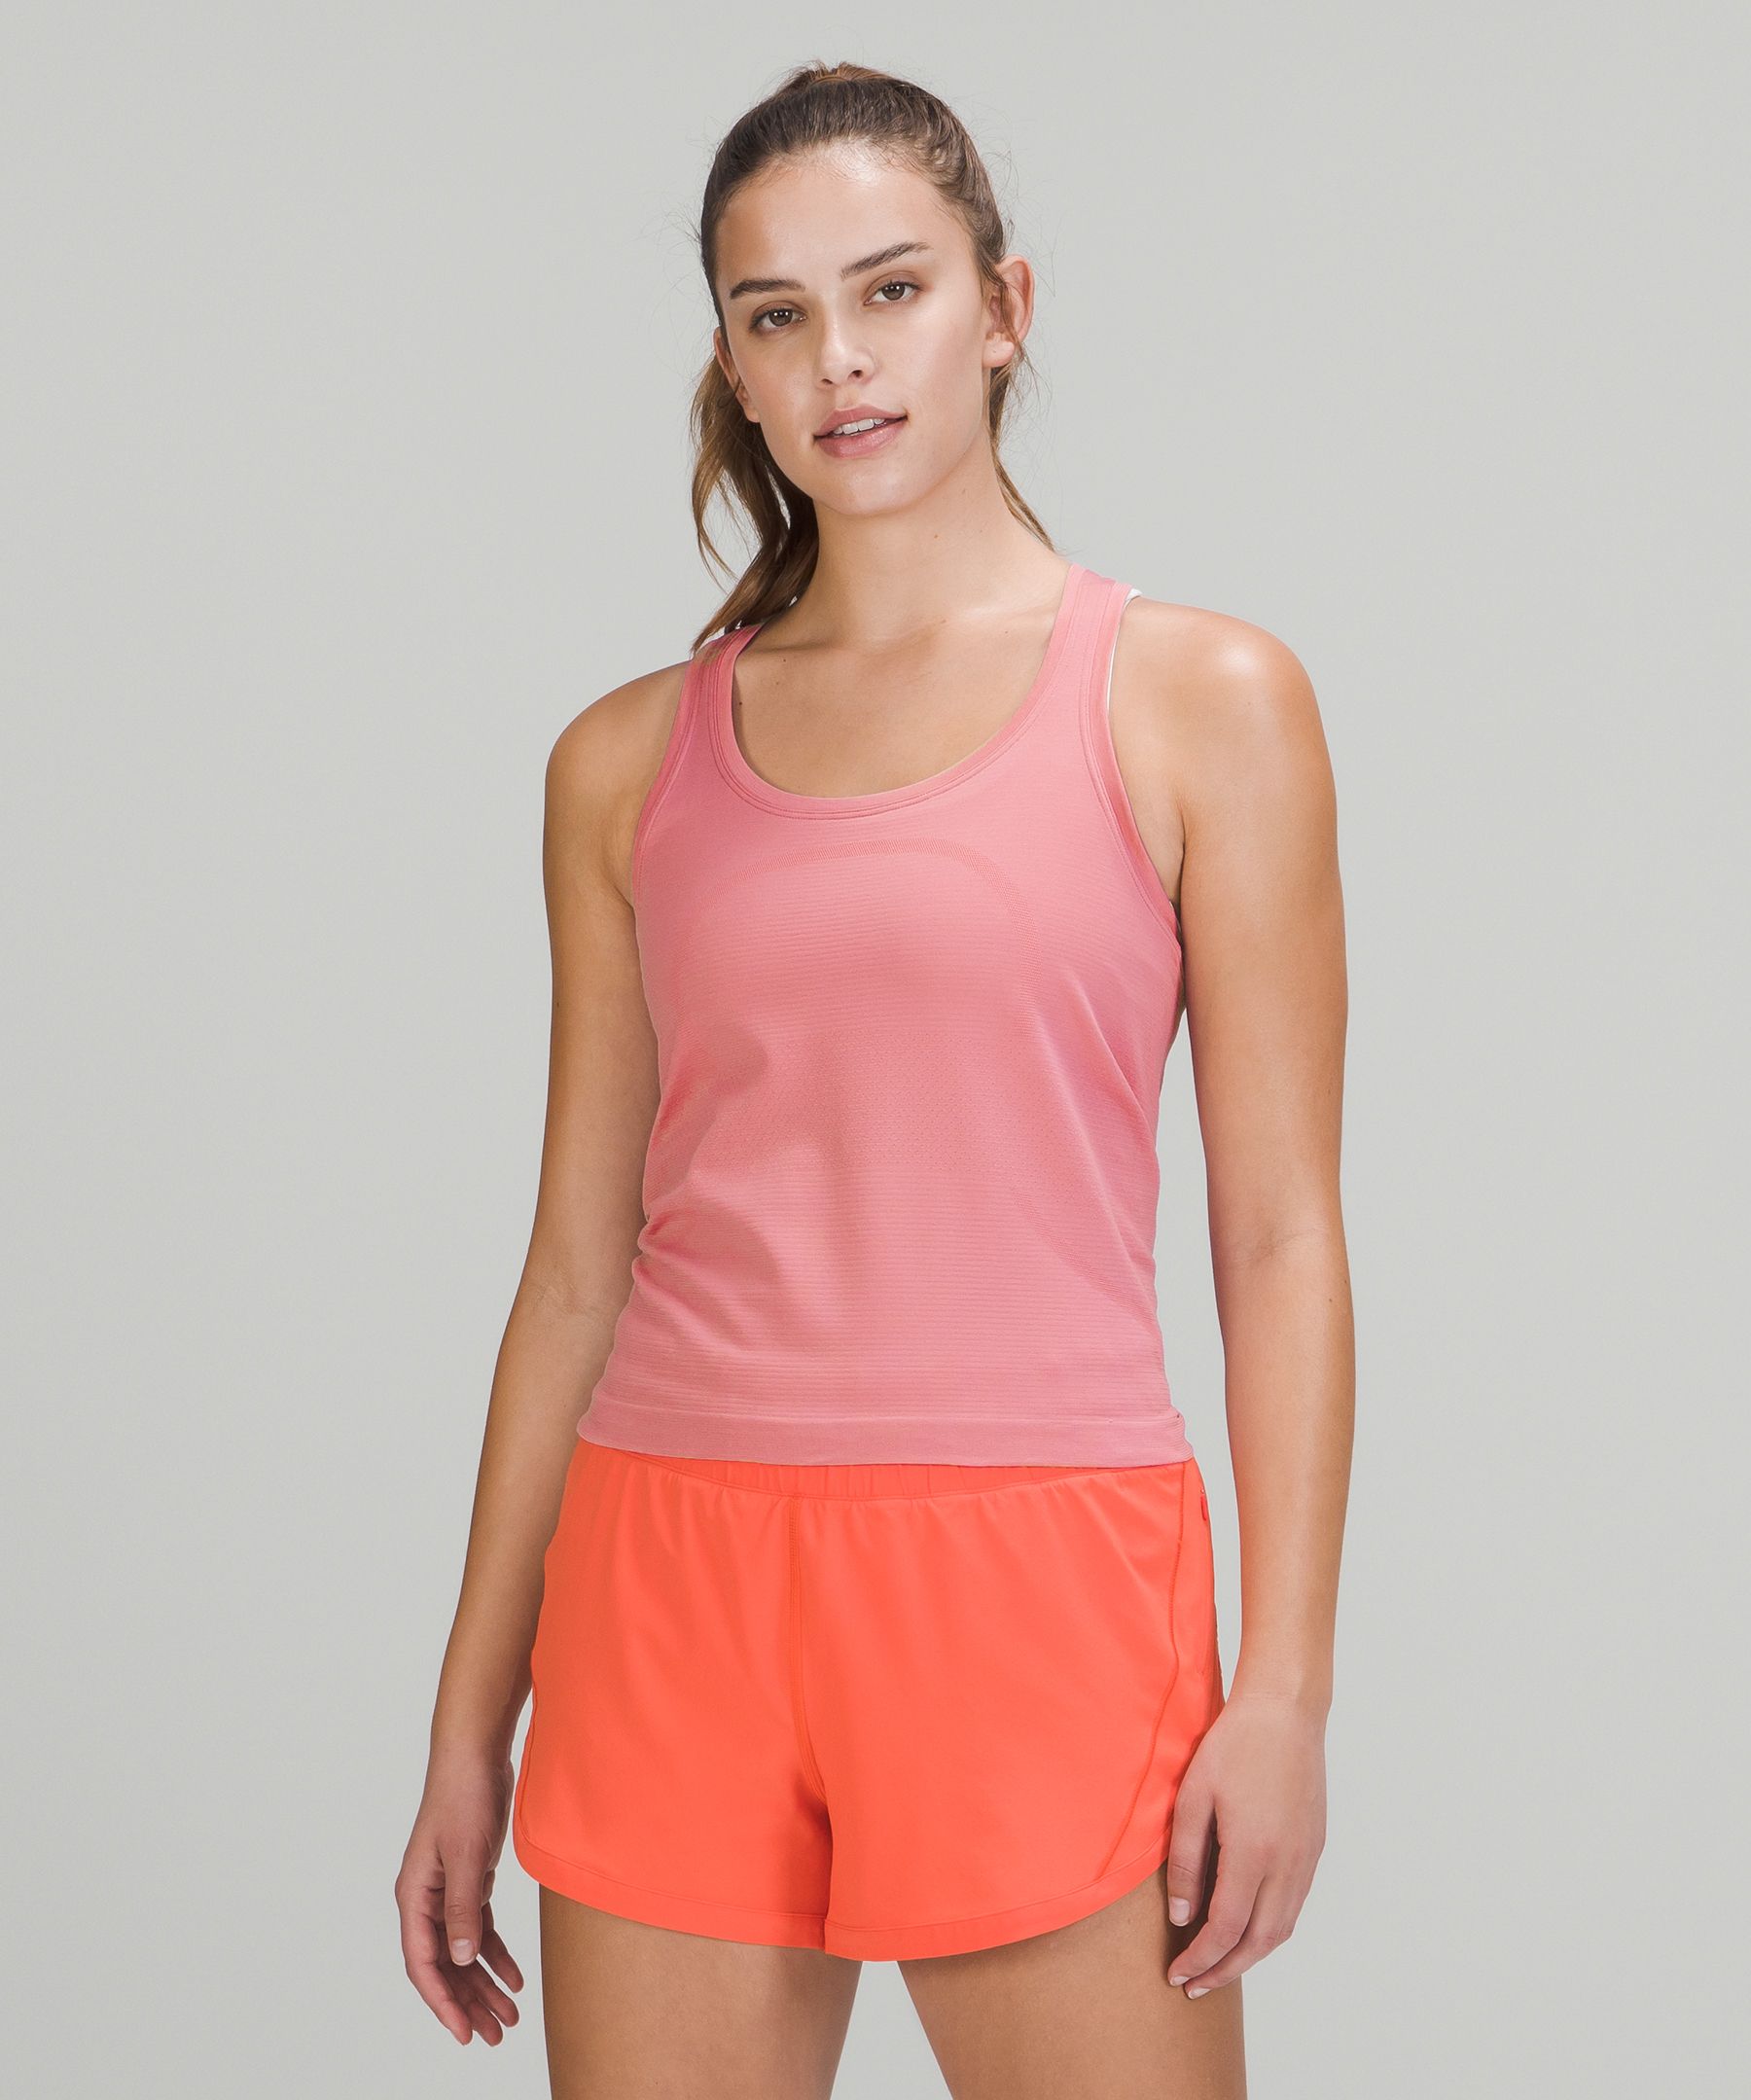 Lululemon Swiftly Tech Racerback Tank Top 2.0 Race Length In Pink Blossom/pink Blossom